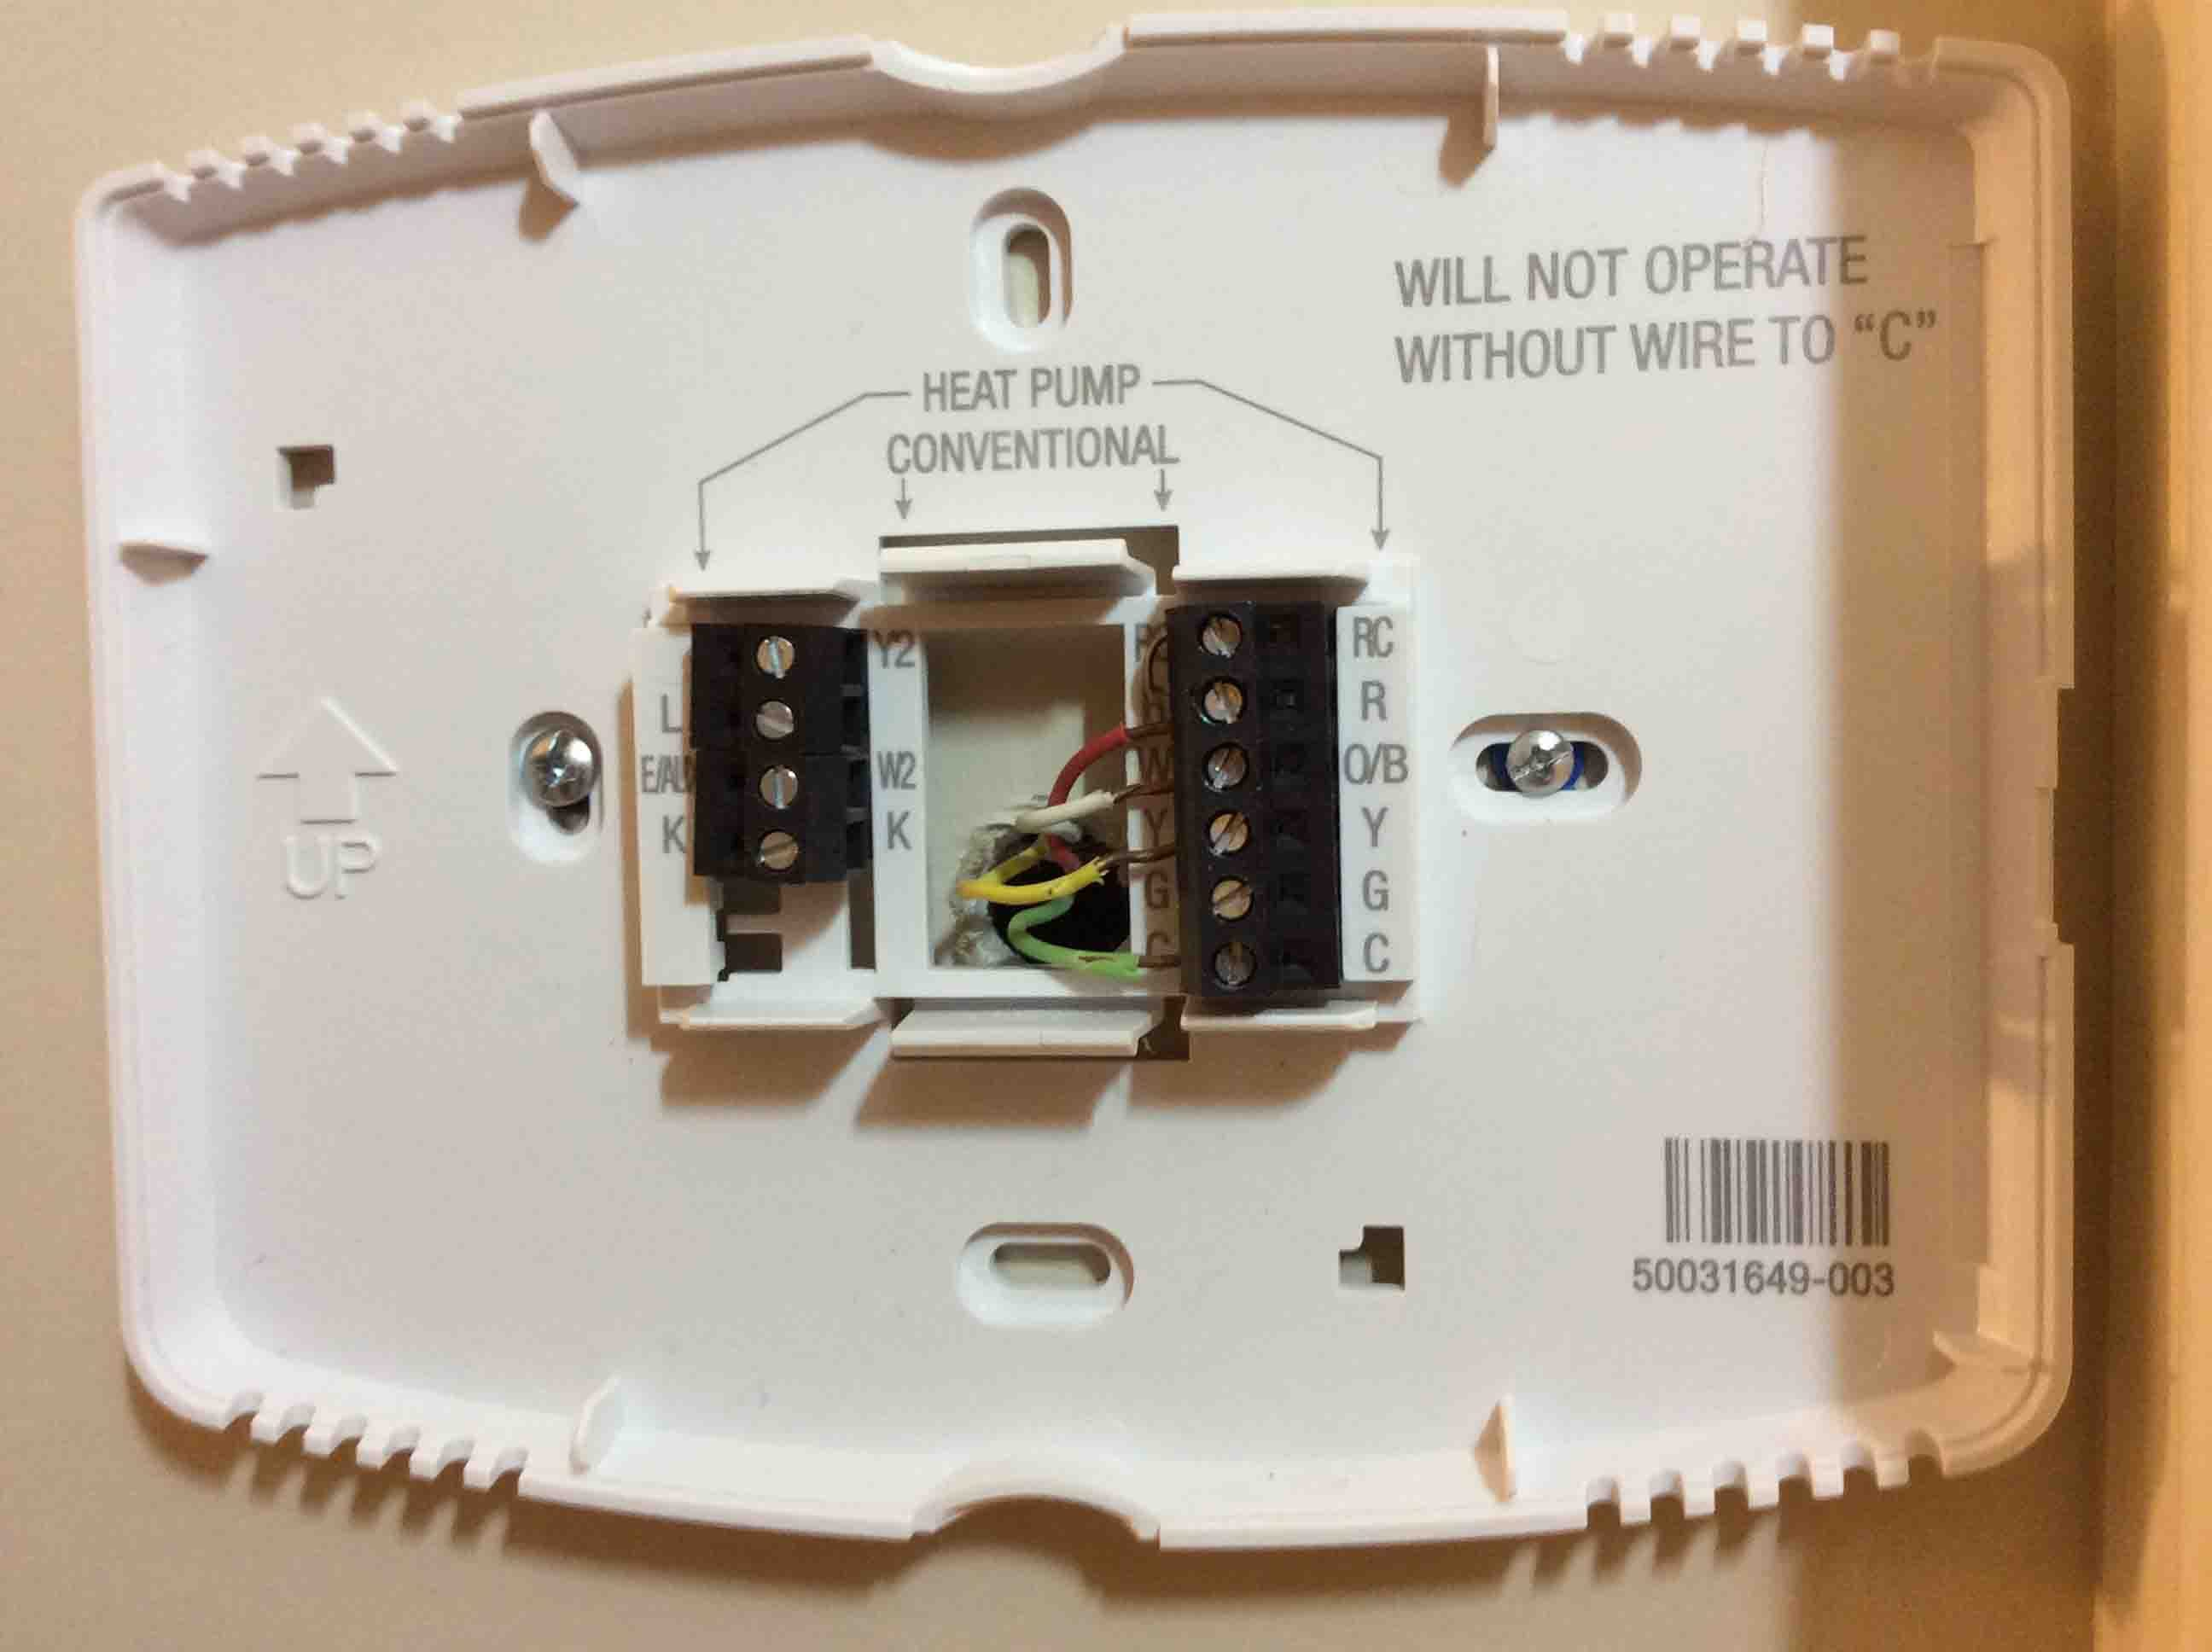 Honeywell Thermostat Wiring Diagram 4 Wire | Tom's Tek Stop - 4 Wire Thermostat Wiring Diagram